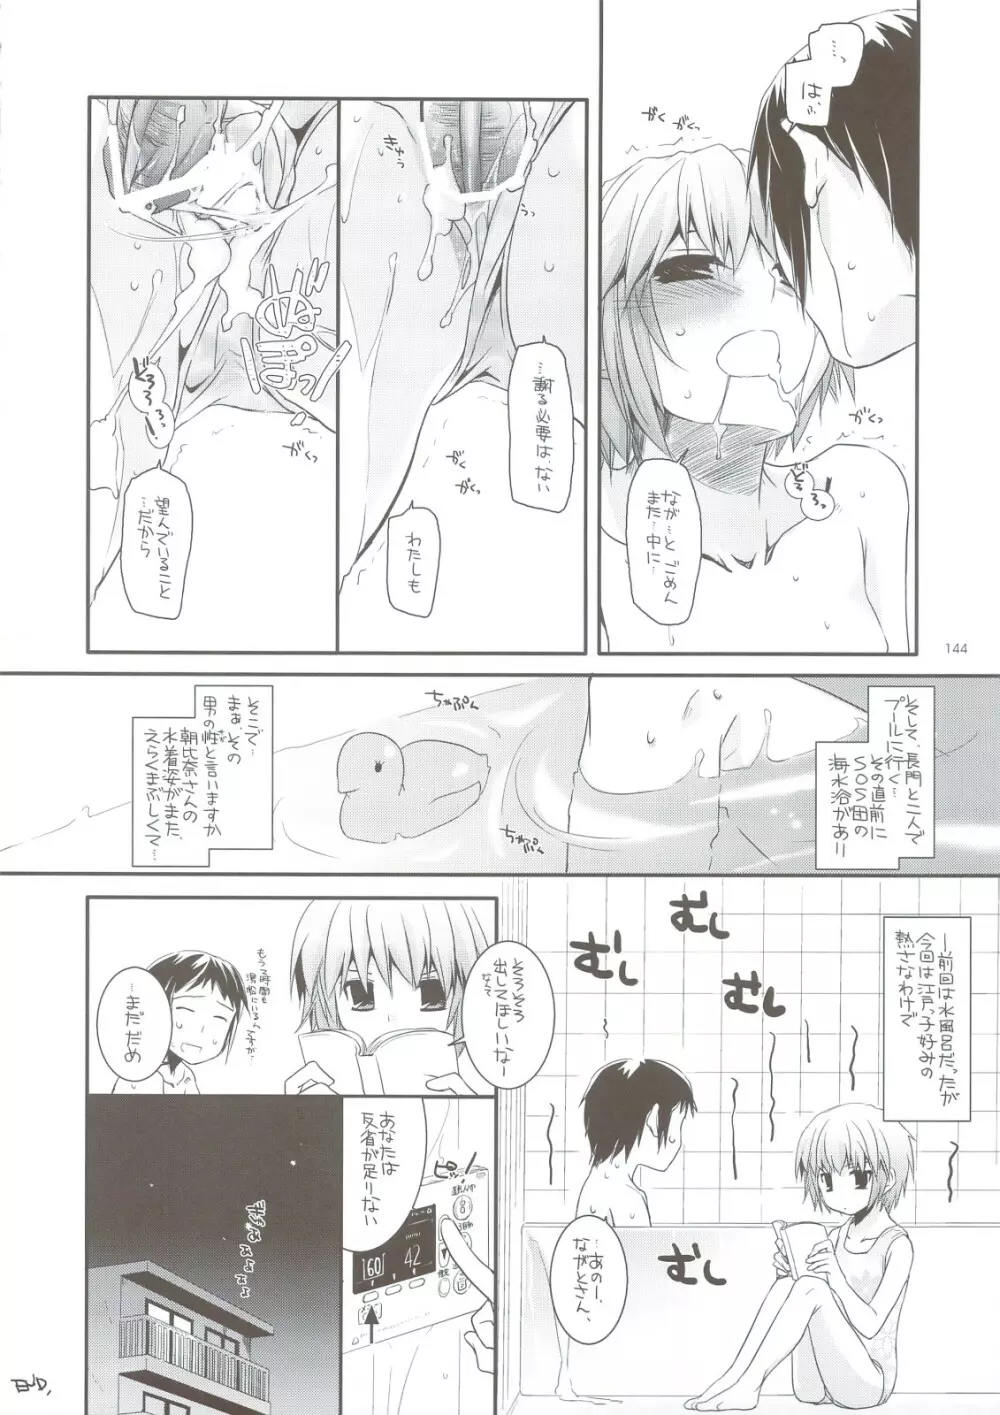 DL-SOS 総集編 - page143